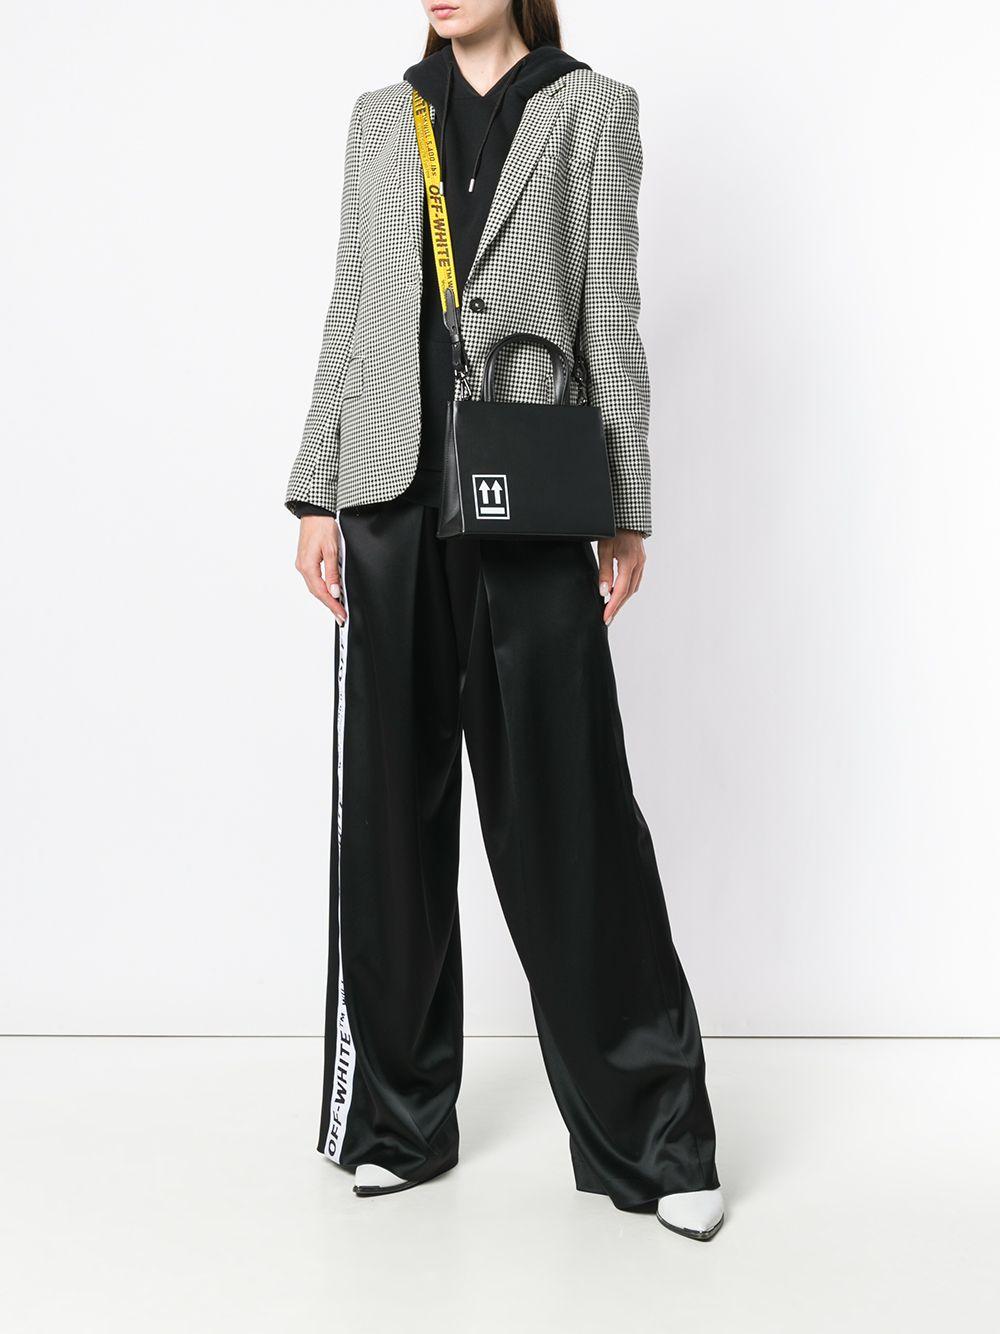 Off-White c/o Virgil Abloh Leather Small Box Tote Bag in Black 